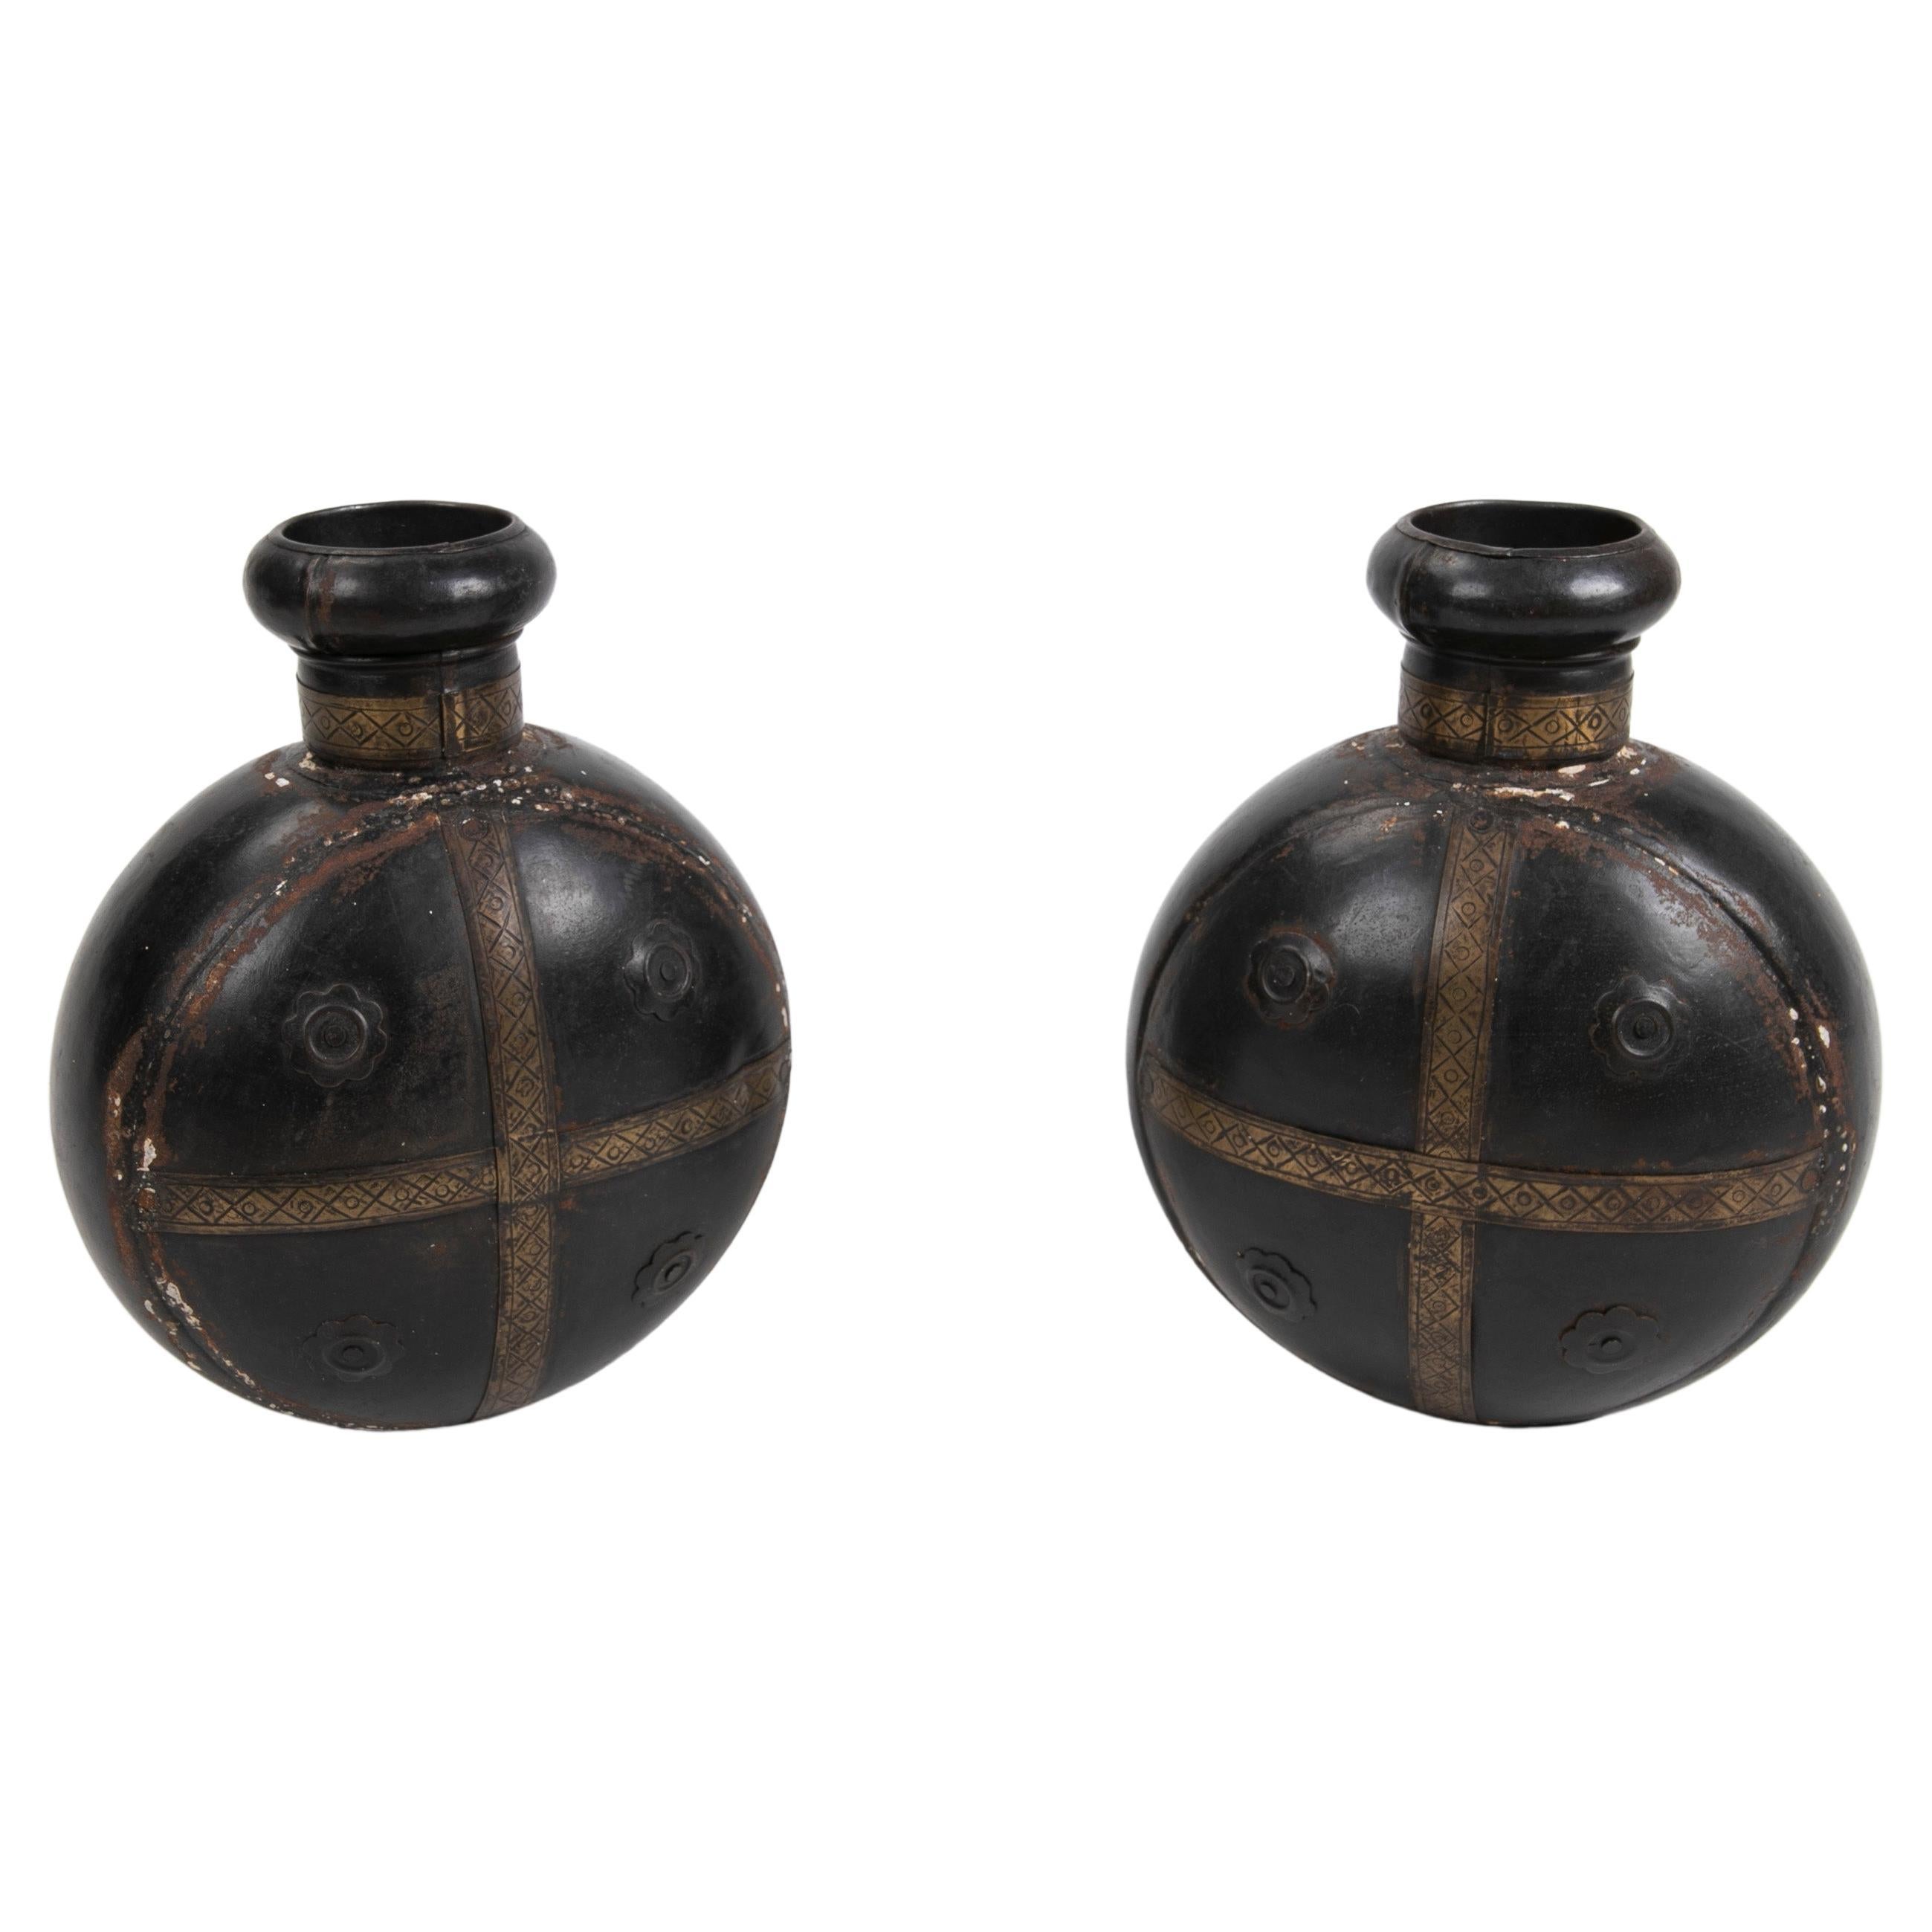 Pair of Decorative Metal Bottles with Decoration 